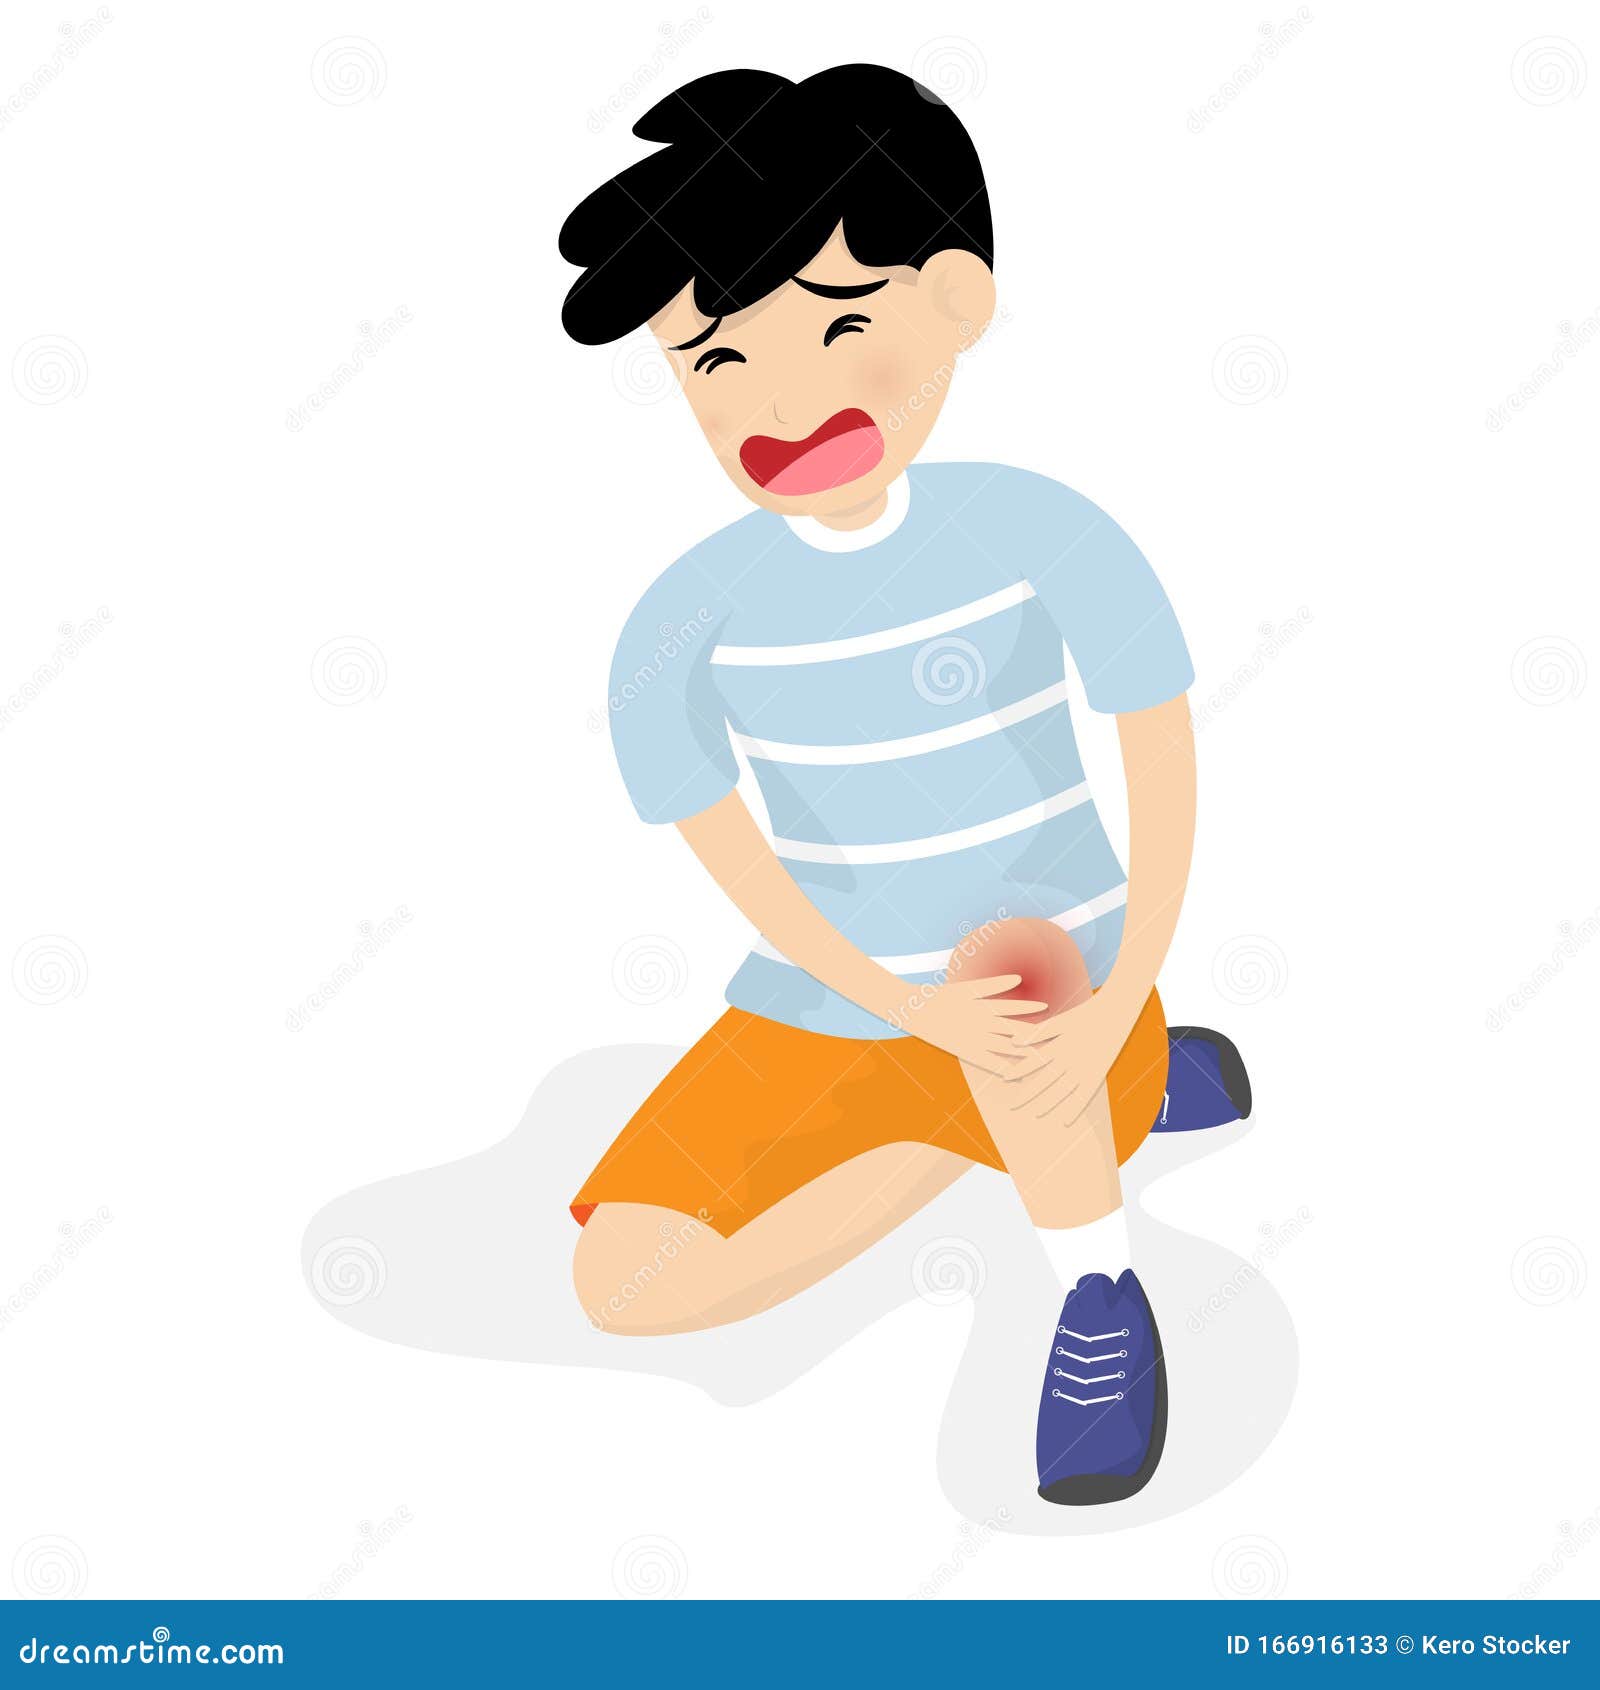 Fell PNG Picture, Boy Fell And Bleeds, Lovely, Boy, Fall PNG Image For Free Download